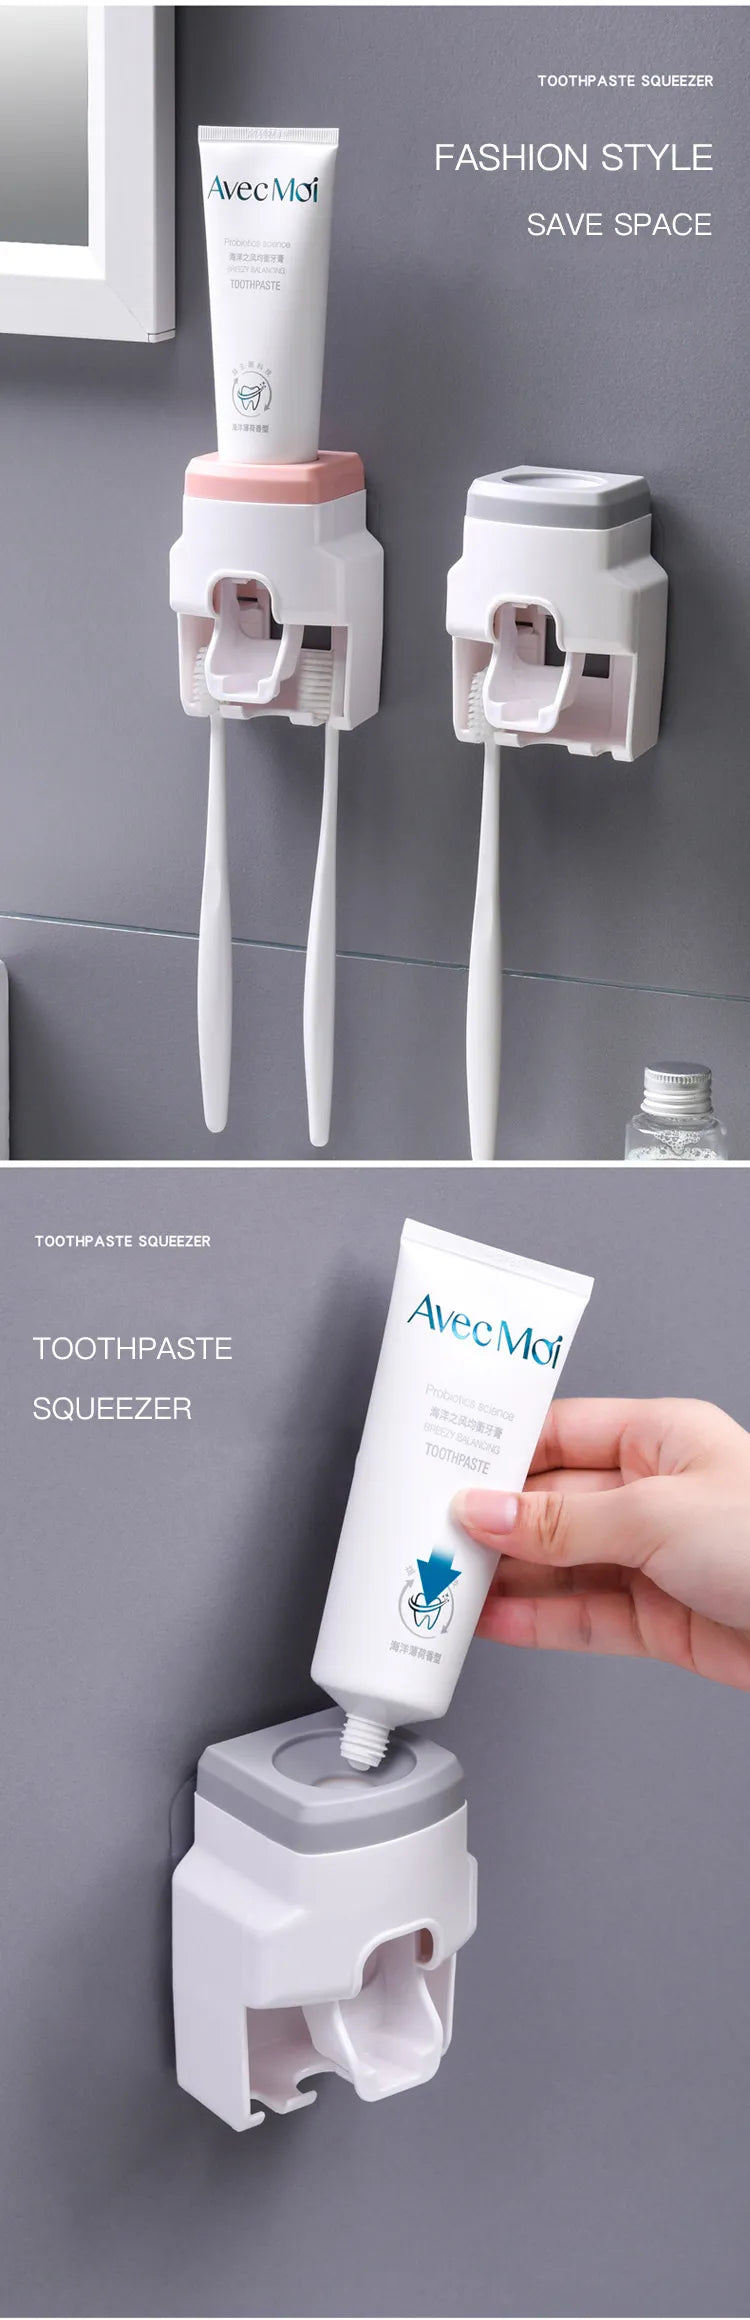 Wall-mounted Toothbrush Holder Automatic Toothpaste Dispenser Squeezer Dust-proof Toothbrush Storage Rack Bathroom Accessories